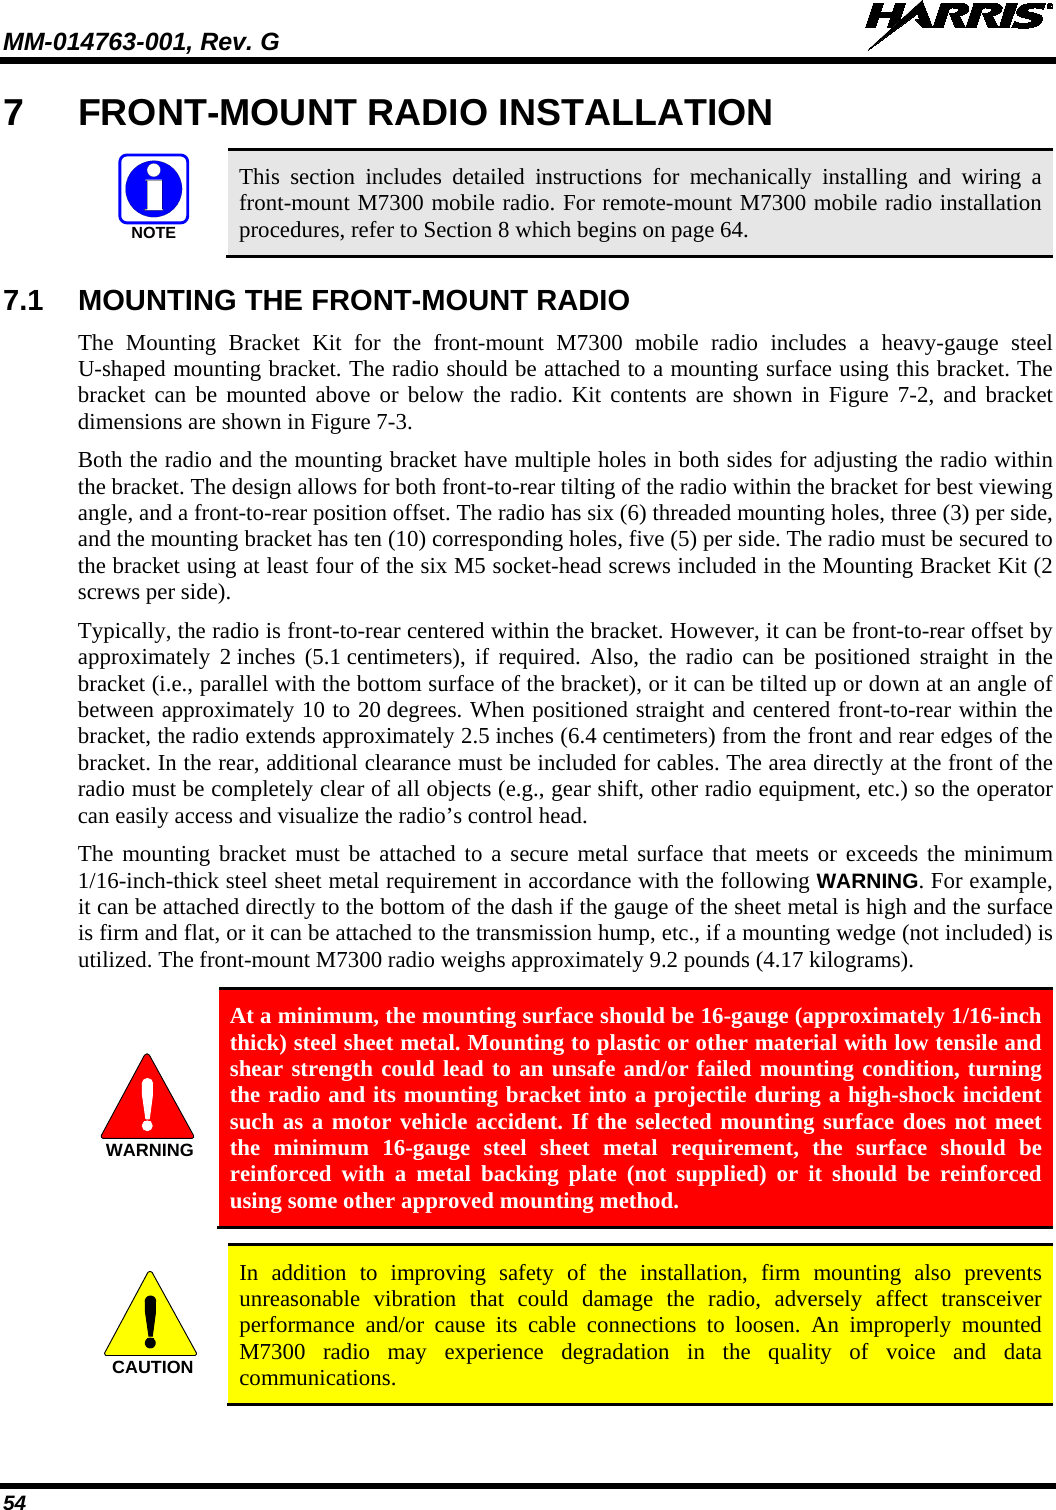 MM-014763-001, Rev. G   54 7  FRONT-MOUNT RADIO INSTALLATION   This section includes detailed instructions for mechanically installing and wiring a front-mount M7300 mobile radio. For remote-mount M7300 mobile radio installation procedures, refer to Section 8 which begins on page 64.  7.1 MOUNTING THE FRONT-MOUNT RADIO The  Mounting Bracket Kit for the front-mount  M7300 mobile radio includes a heavy-gauge steel U-shaped mounting bracket. The radio should be attached to a mounting surface using this bracket. The bracket can be mounted above or below the radio. Kit contents are shown in Figure 7-2, and bracket dimensions are shown in Figure 7-3. Both the radio and the mounting bracket have multiple holes in both sides for adjusting the radio within the bracket. The design allows for both front-to-rear tilting of the radio within the bracket for best viewing angle, and a front-to-rear position offset. The radio has six (6) threaded mounting holes, three (3) per side, and the mounting bracket has ten (10) corresponding holes, five (5) per side. The radio must be secured to the bracket using at least four of the six M5 socket-head screws included in the Mounting Bracket Kit (2 screws per side). Typically, the radio is front-to-rear centered within the bracket. However, it can be front-to-rear offset by approximately 2 inches  (5.1 centimeters),  if required. Also, the radio can be positioned straight in the bracket (i.e., parallel with the bottom surface of the bracket), or it can be tilted up or down at an angle of between approximately 10 to 20 degrees. When positioned straight and centered front-to-rear within the bracket, the radio extends approximately 2.5 inches (6.4 centimeters) from the front and rear edges of the bracket. In the rear, additional clearance must be included for cables. The area directly at the front of the radio must be completely clear of all objects (e.g., gear shift, other radio equipment, etc.) so the operator can easily access and visualize the radio’s control head. The mounting bracket must be attached to a secure metal surface that meets or exceeds the minimum 1/16-inch-thick steel sheet metal requirement in accordance with the following WARNING. For example, it can be attached directly to the bottom of the dash if the gauge of the sheet metal is high and the surface is firm and flat, or it can be attached to the transmission hump, etc., if a mounting wedge (not included) is utilized. The front-mount M7300 radio weighs approximately 9.2 pounds (4.17 kilograms).   At a minimum, the mounting surface should be 16-gauge (approximately 1/16-inch thick) steel sheet metal. Mounting to plastic or other material with low tensile and shear strength could lead to an unsafe and/or failed mounting condition, turning the radio and its mounting bracket into a projectile during a high-shock incident such as a motor vehicle accident. If the selected mounting surface does not meet the minimum 16-gauge steel sheet metal requirement, the surface should be reinforced with a metal backing plate (not supplied) or it should be reinforced using some other approved mounting method.   In addition to improving safety of the installation, firm mounting also prevents unreasonable vibration that could damage the radio, adversely affect transceiver performance and/or cause its cable connections to loosen. An improperly mounted M7300 radio may experience degradation in the quality of voice and data communications.  NOTEWARNINGCAUTION